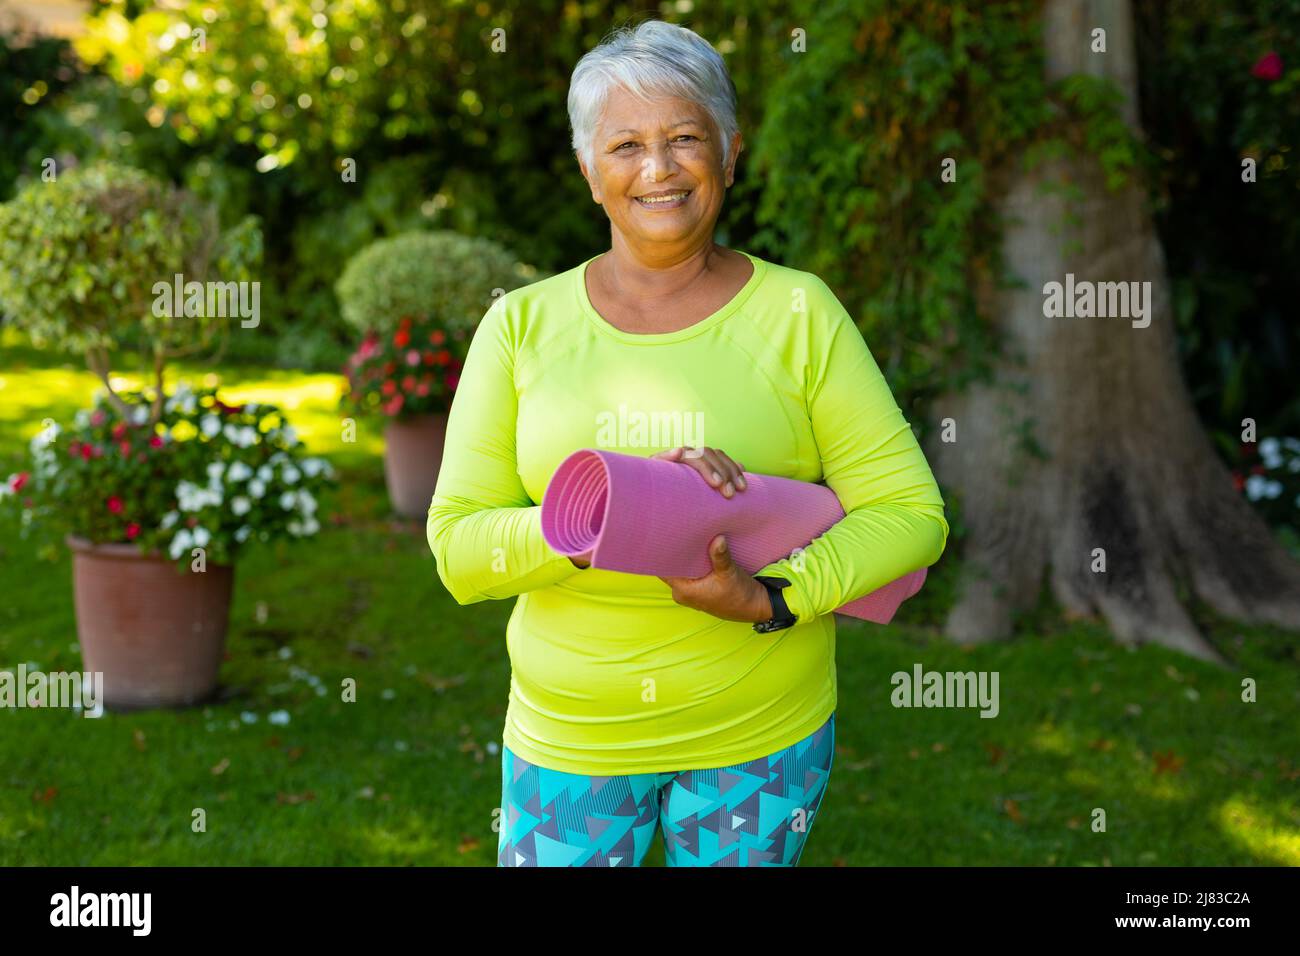 Portrait of smiling biracial senior woman wearing sports clothing holding yoga mat against plants Stock Photo